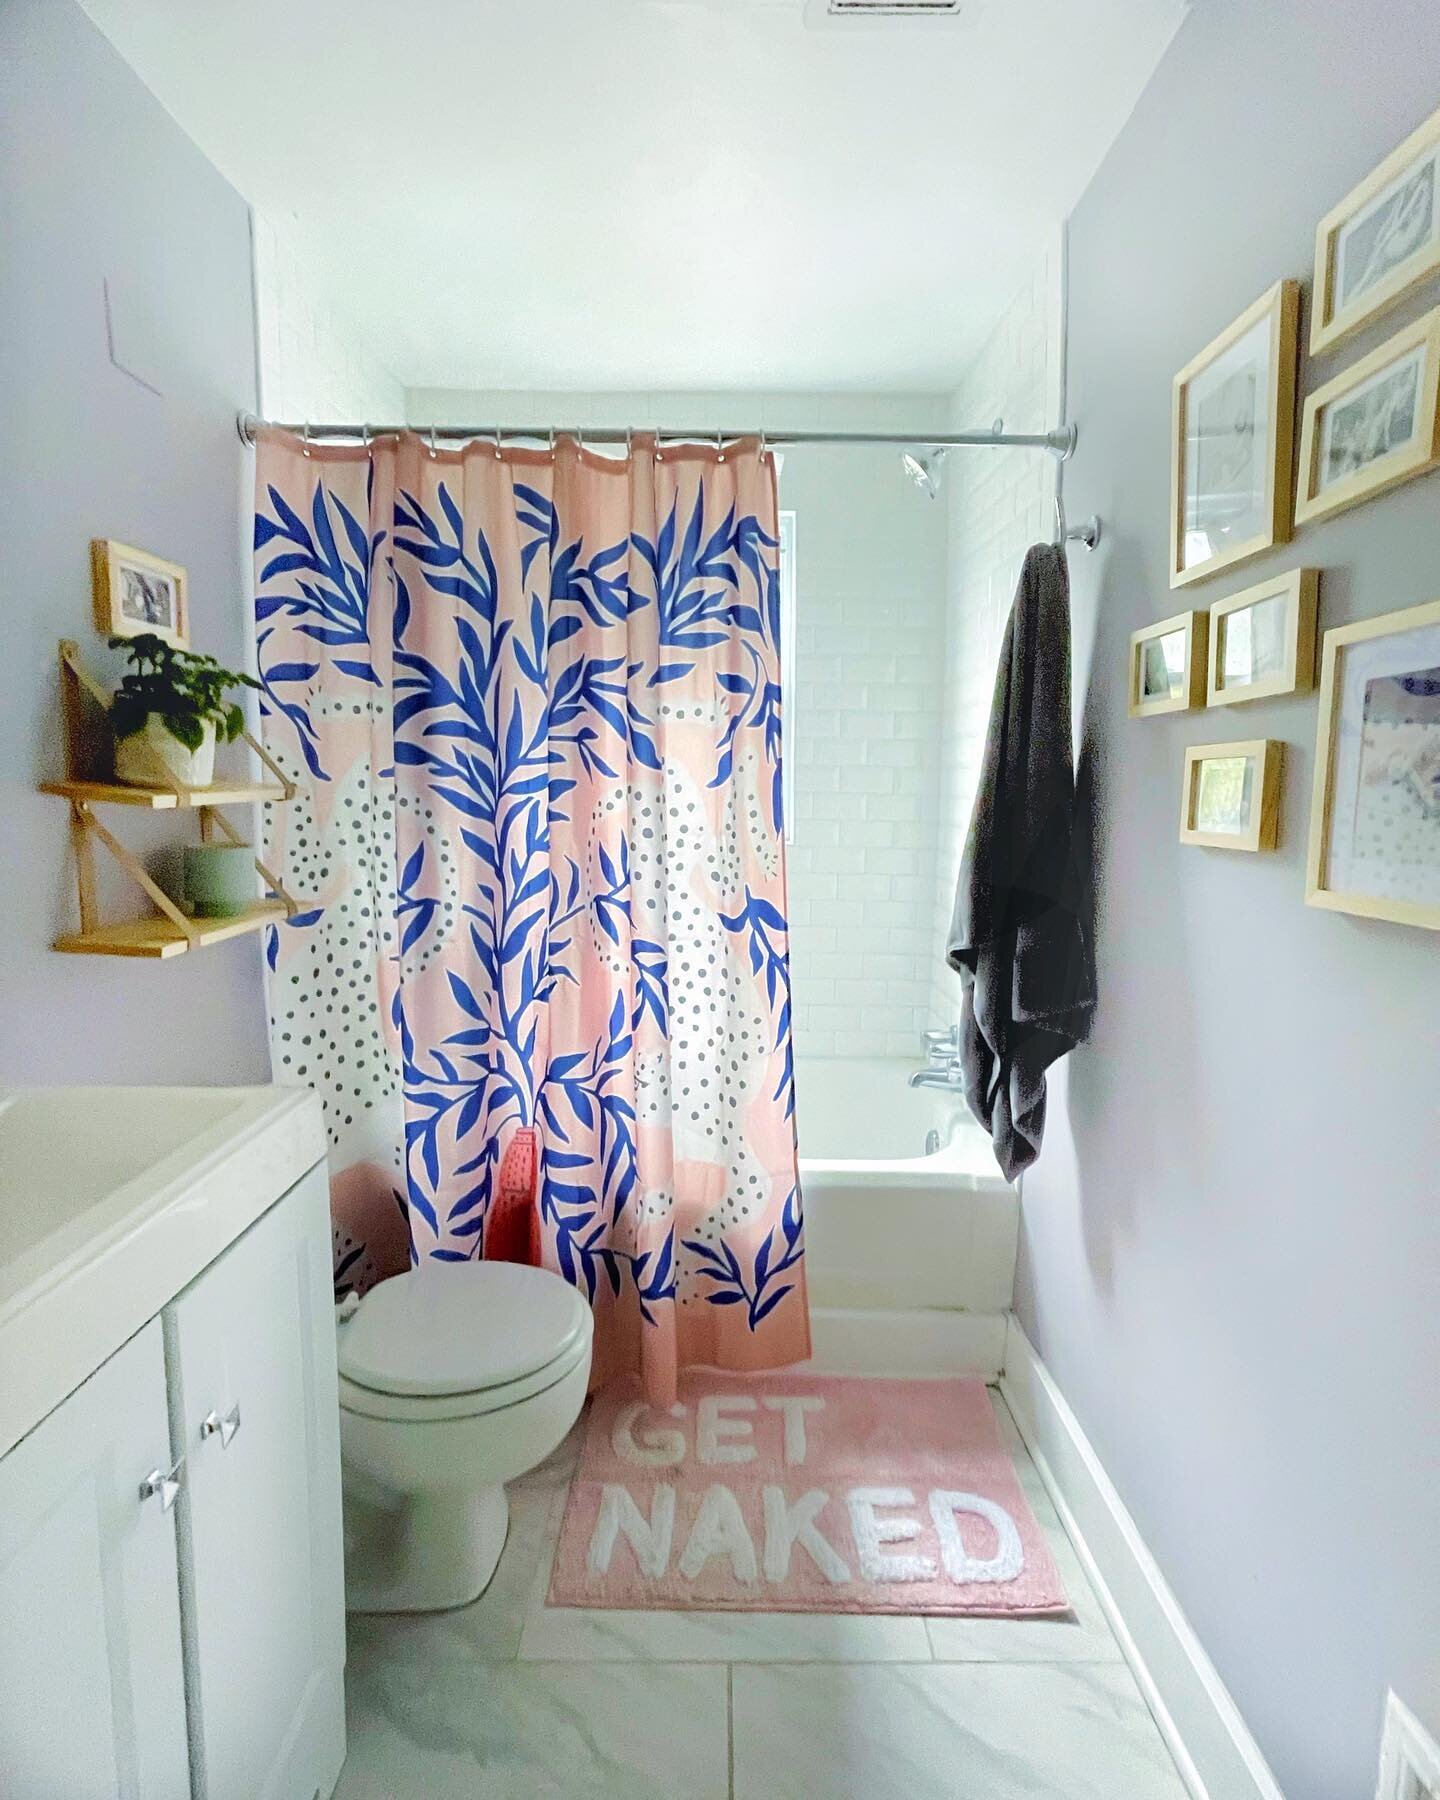 Savannah&rsquo;s Apartment Part II: The Bathroom is complete! Savannah said specifically for this space that she wanted a super fun shower curtain, some storage solutions for her towels and toiletries, and loved the idea of pictures/drawings of nude 